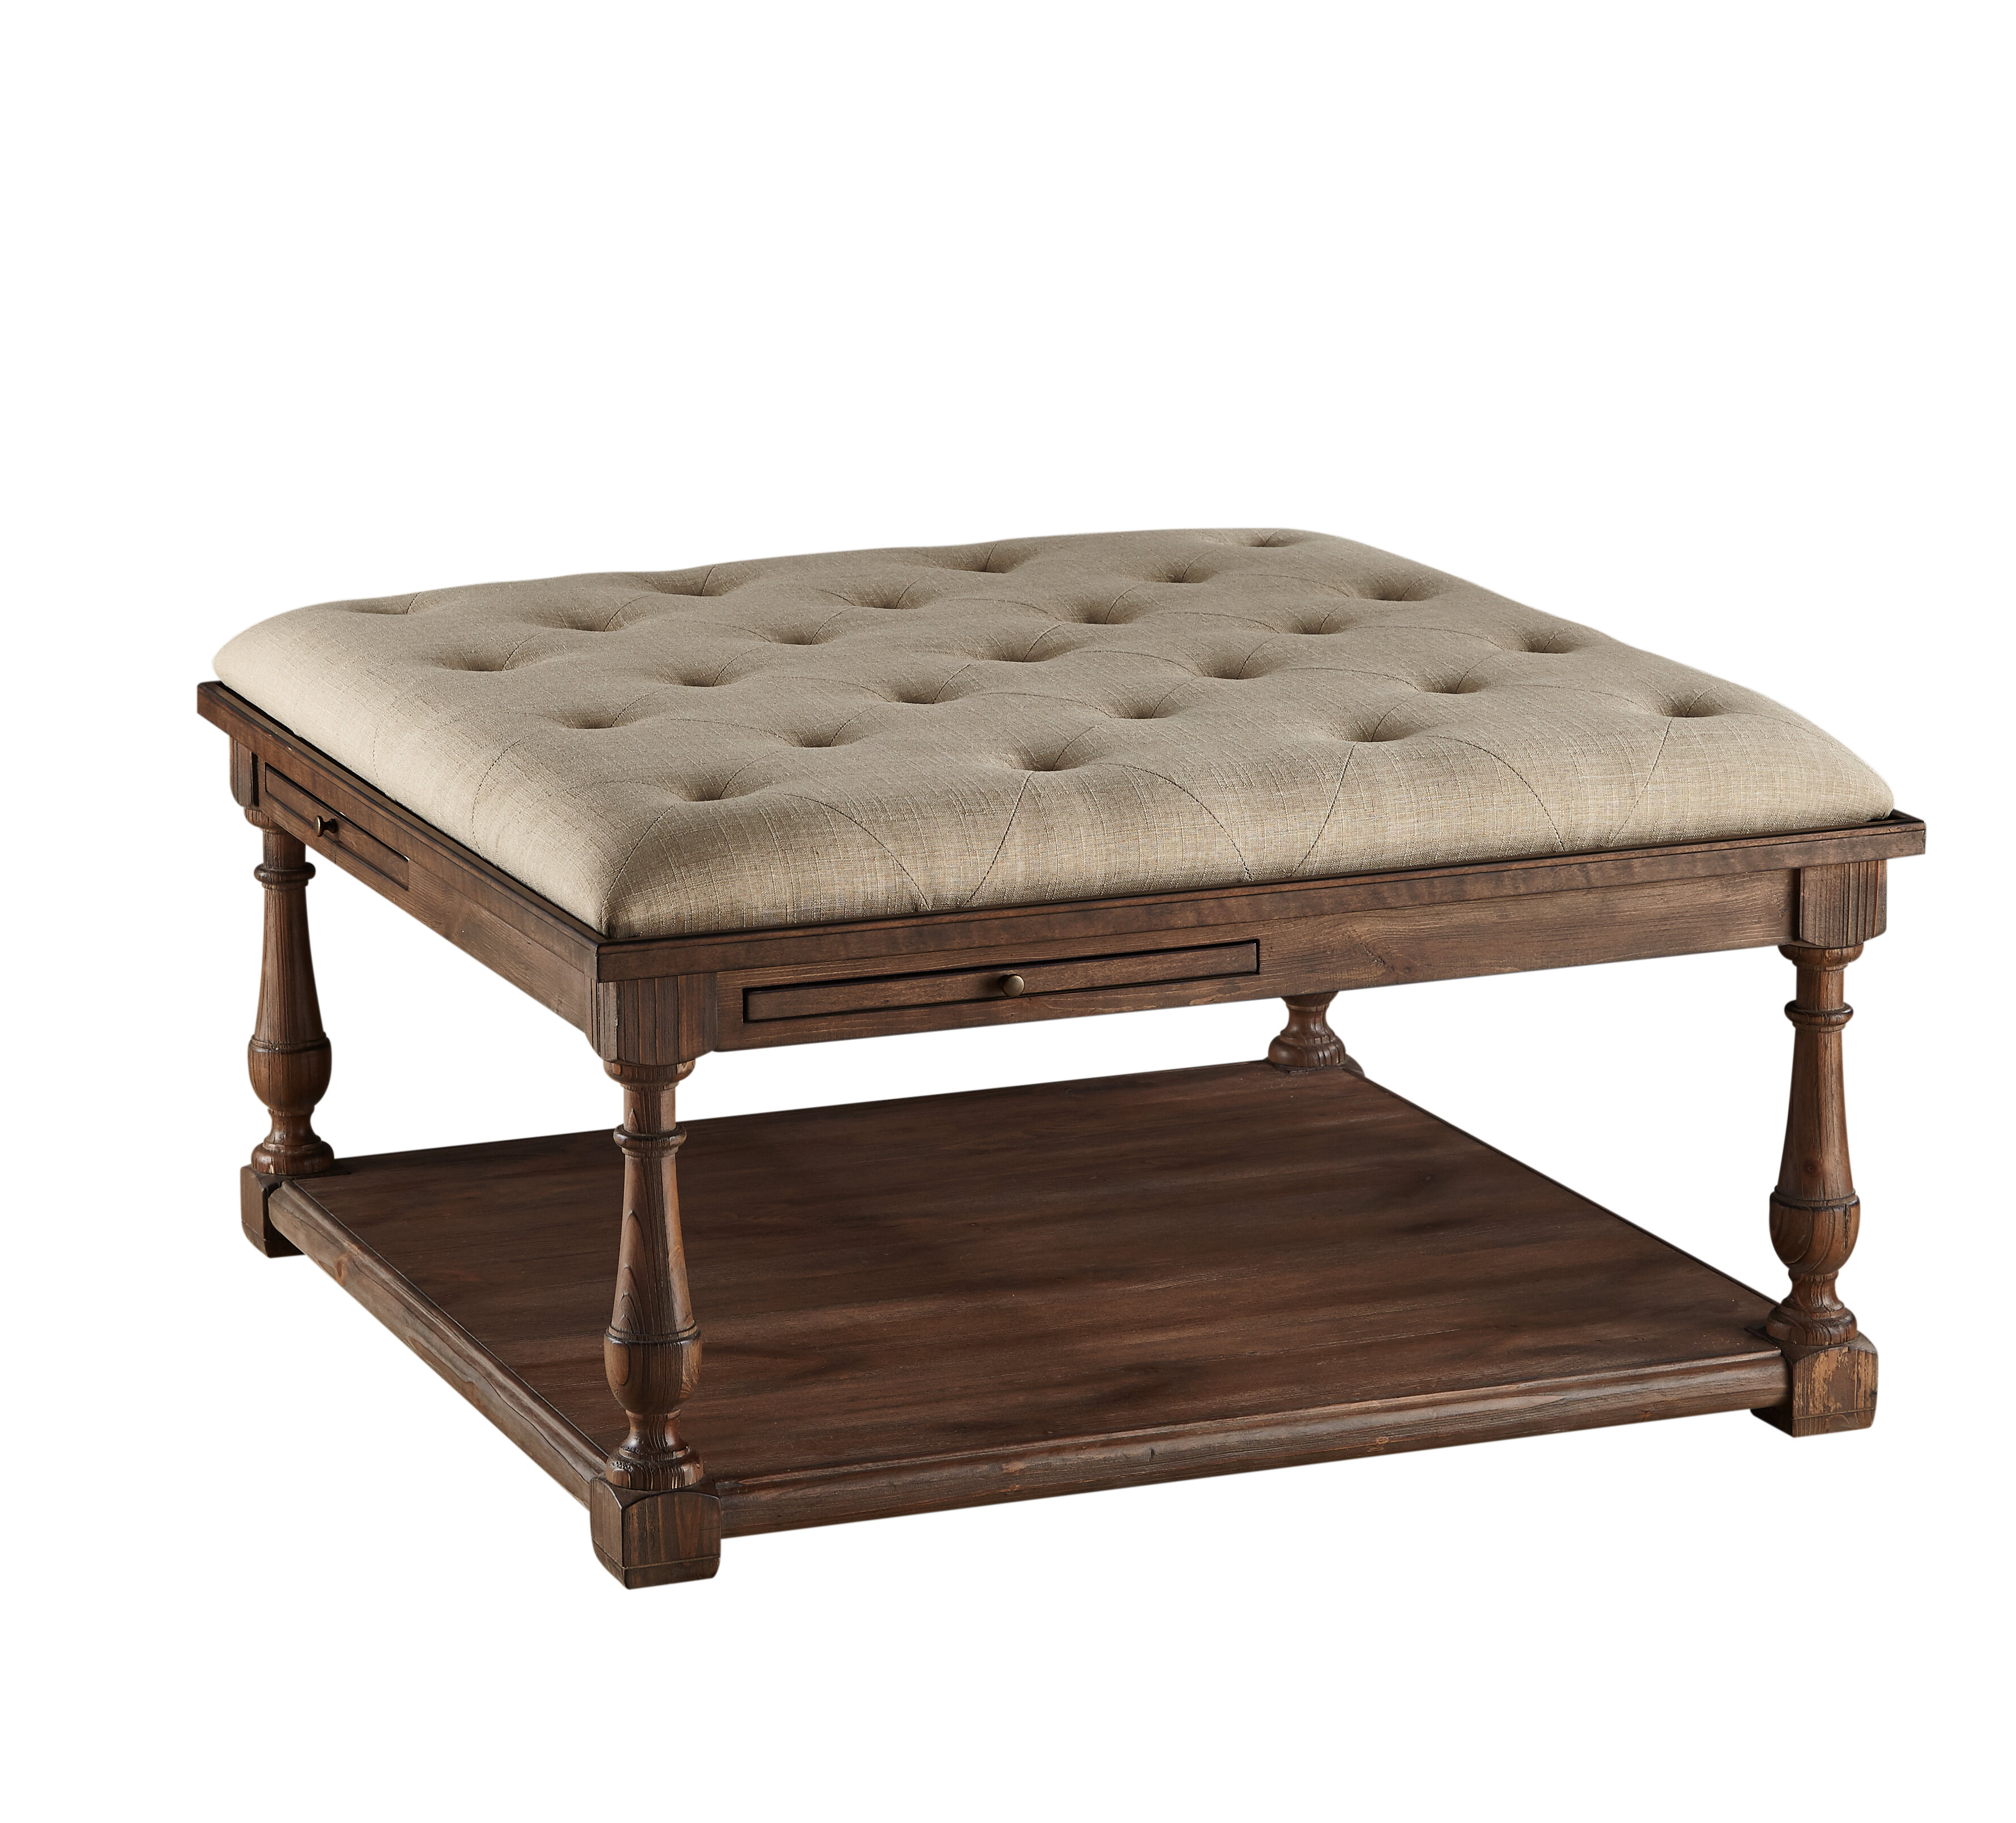 tufted ottoman coffee table